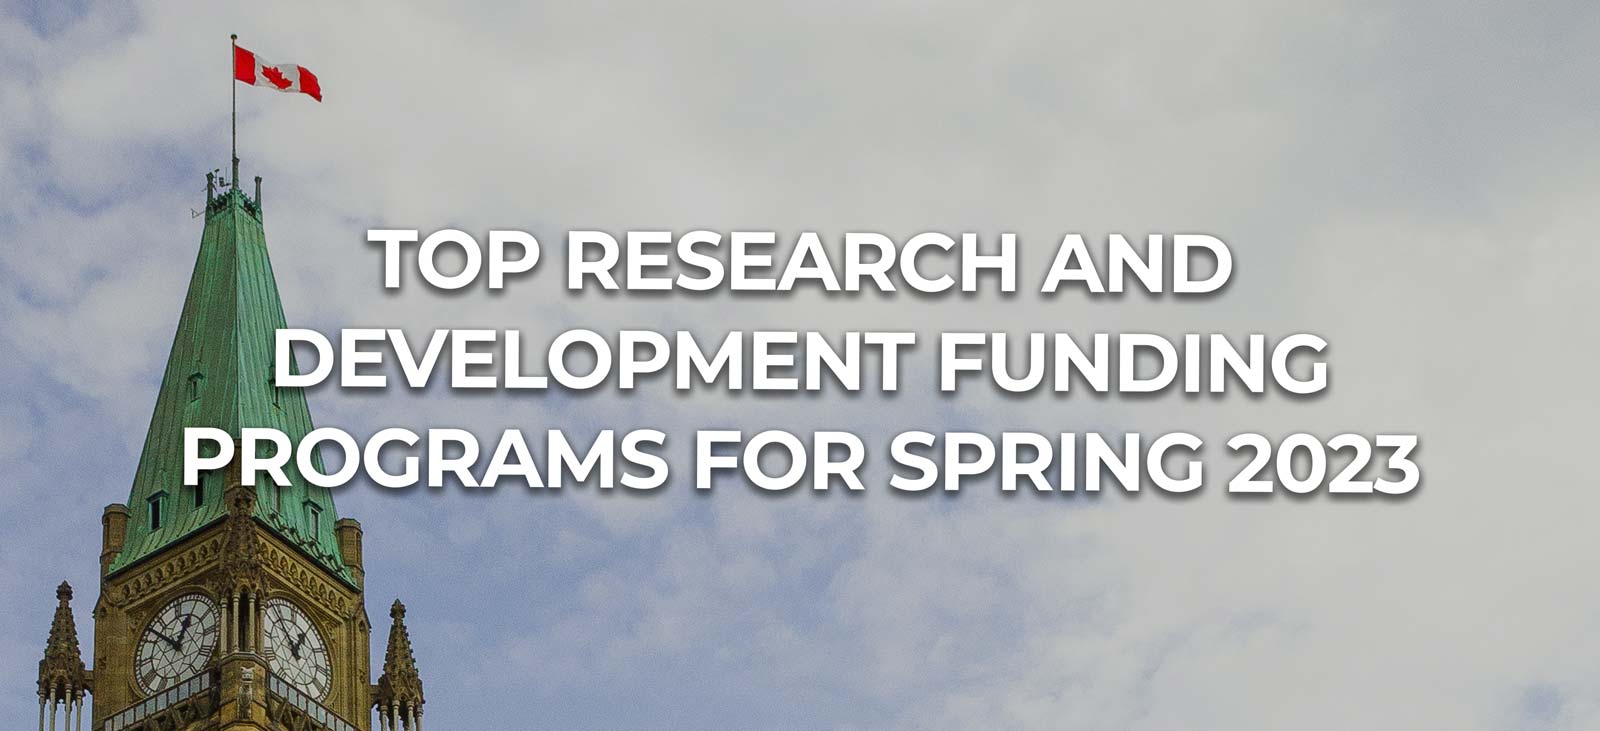 Top Research and Development Funding Programs for Spring 2023